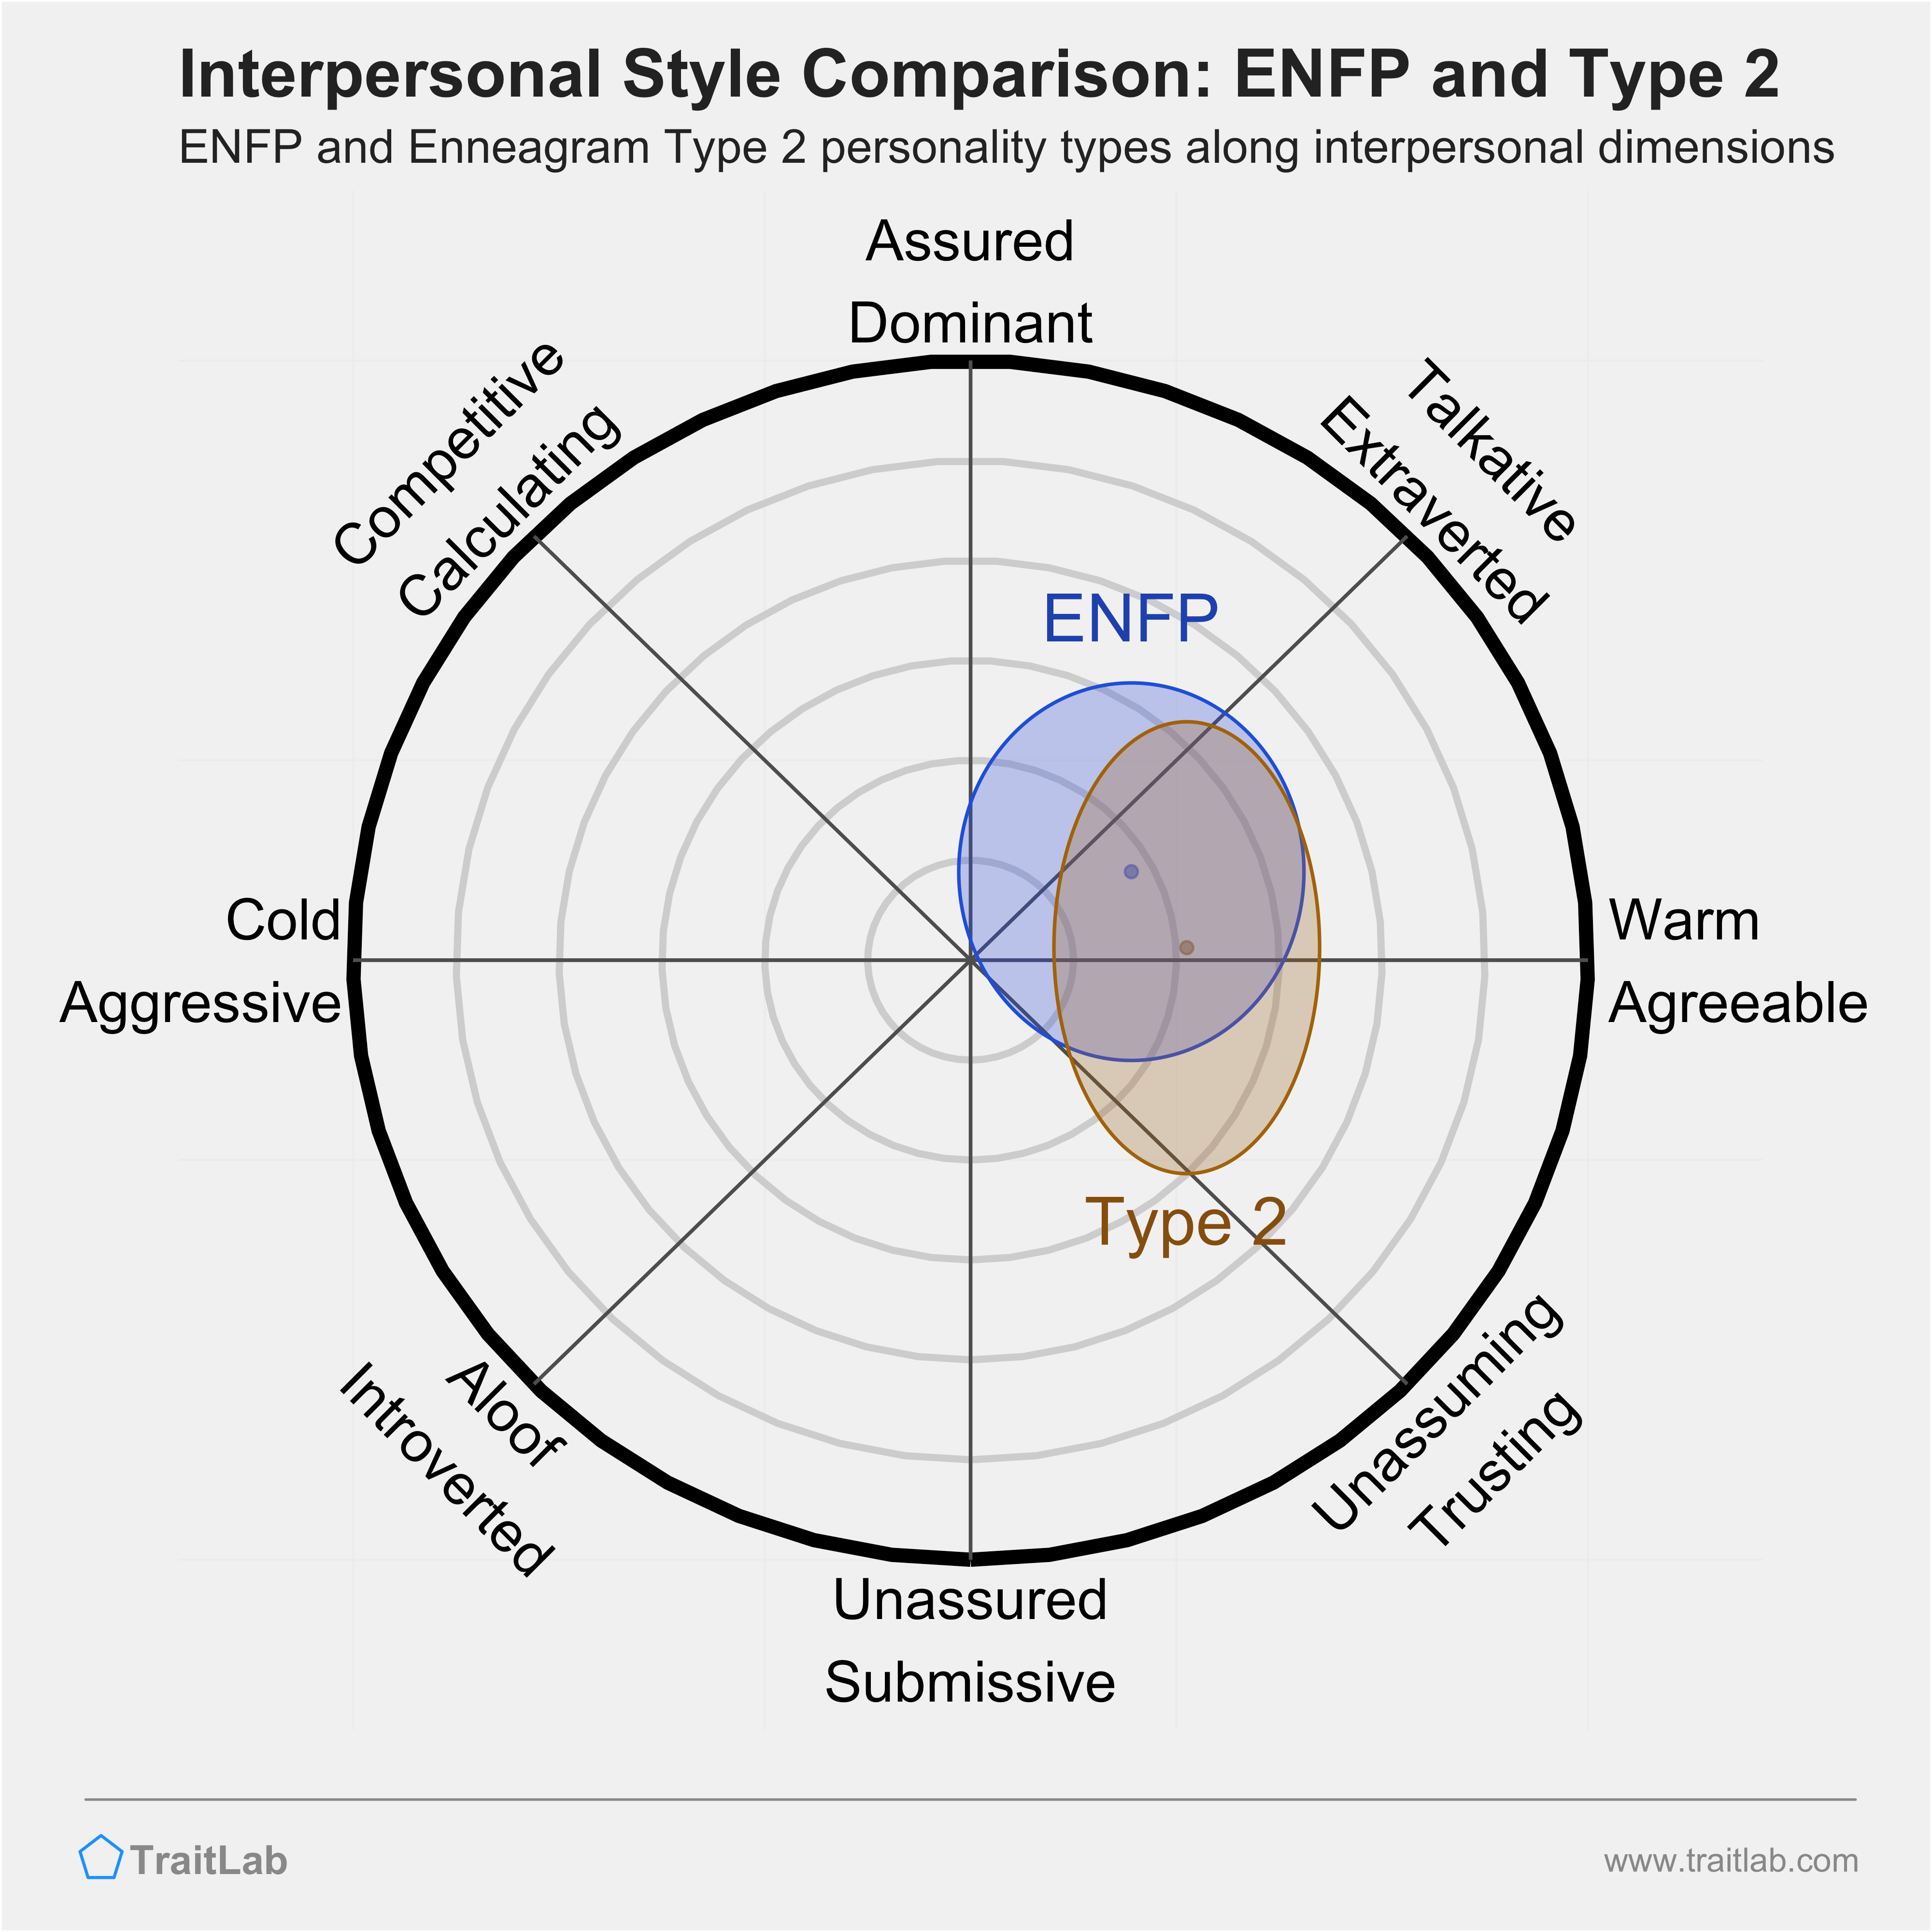 Enneagram ENFP and Type 2 comparison across interpersonal dimensions